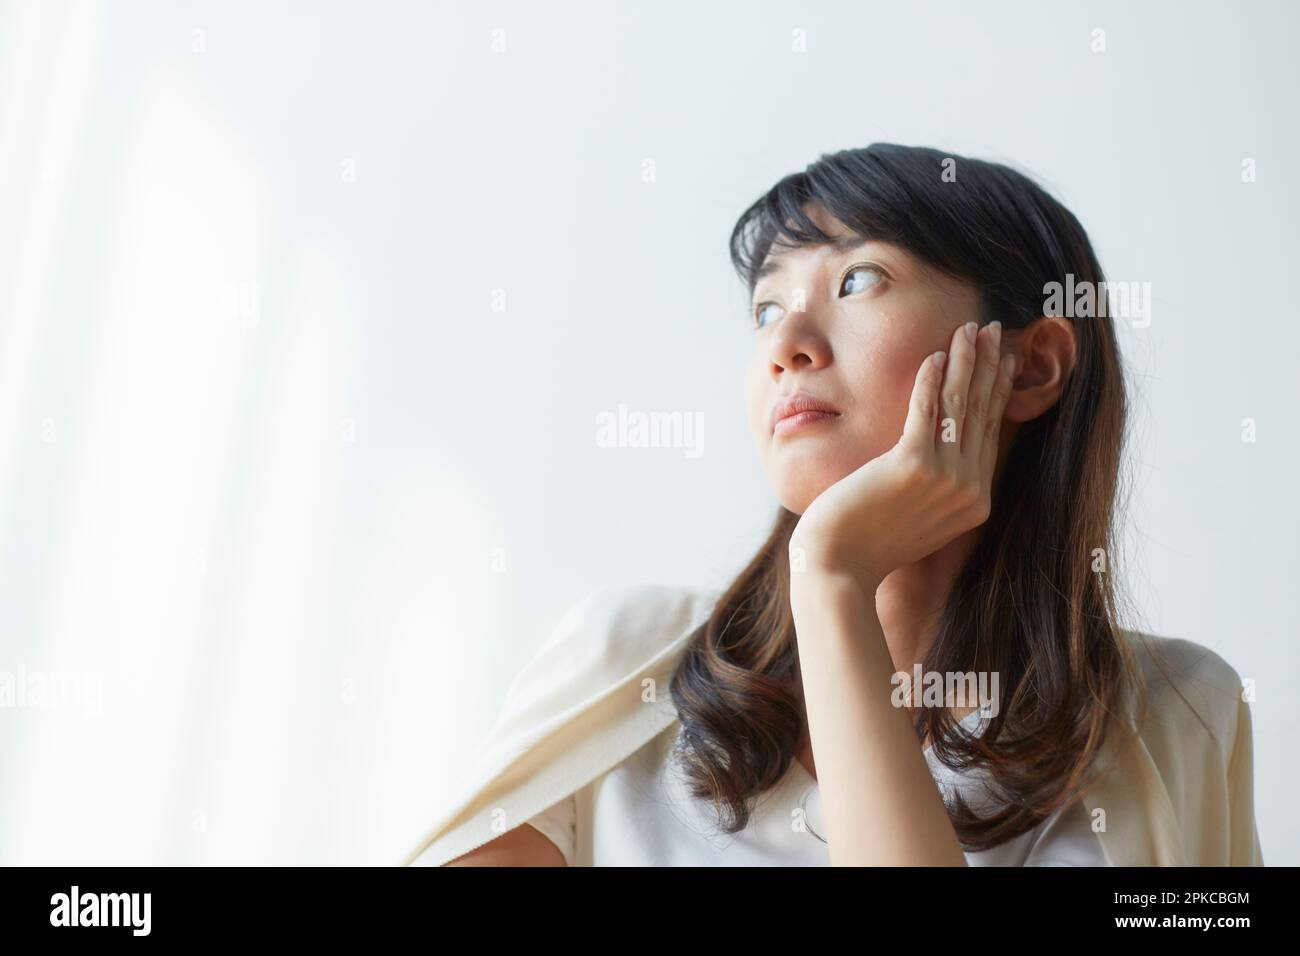 Woman looking out window with cheekbones Stock Photo